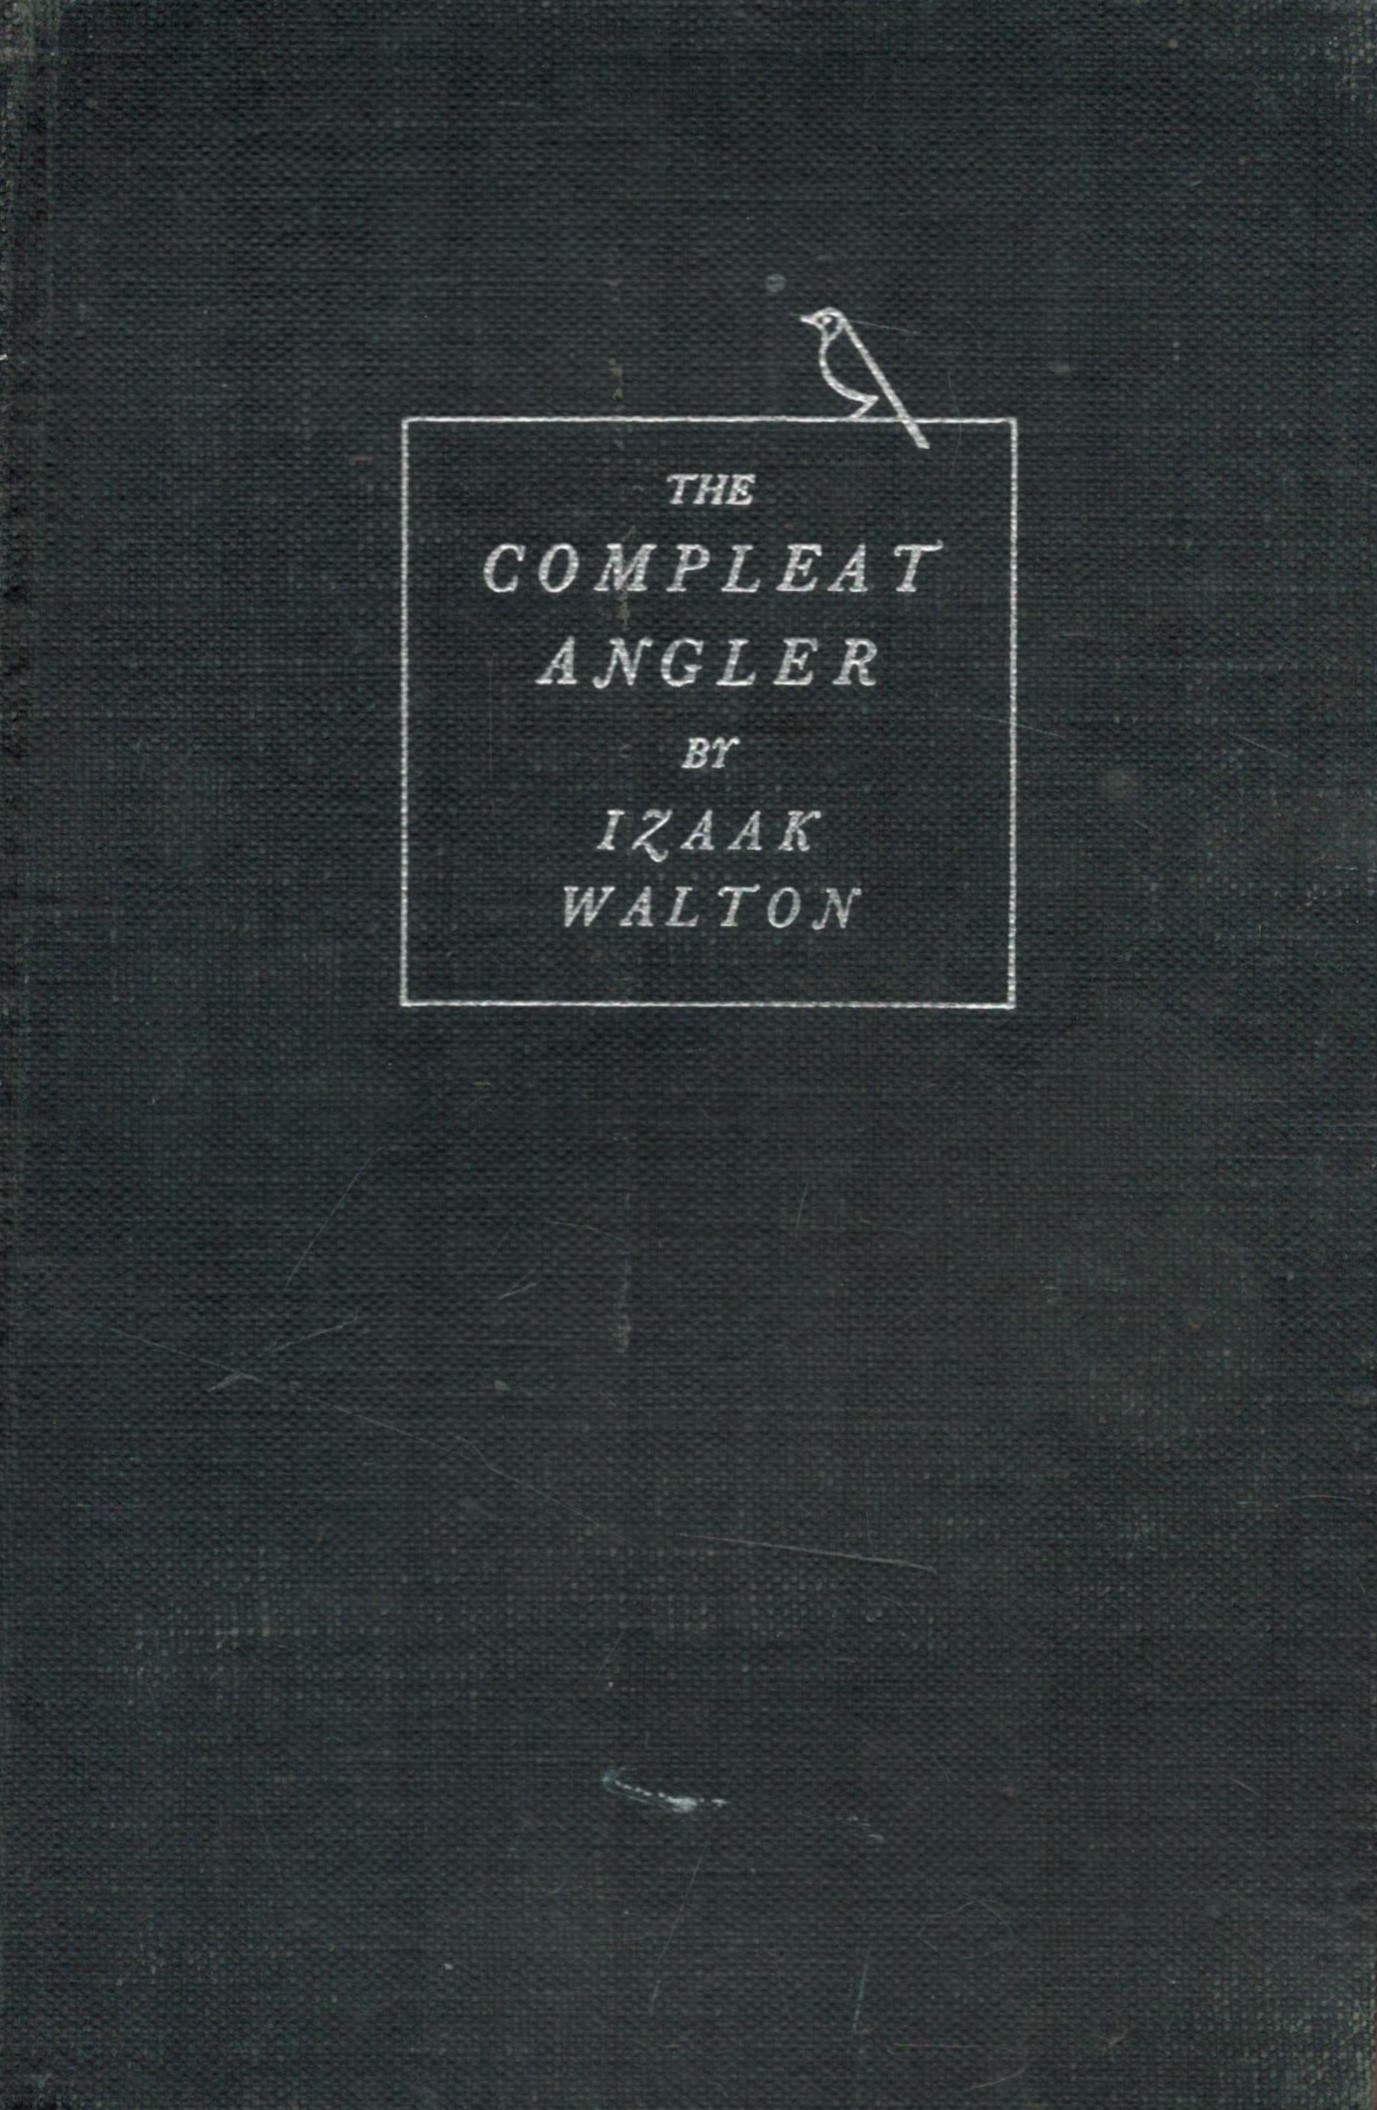 The Complete Angler by Izaak Walton 1948 First Goldfinch Titles Edition Hardback Book with 244 pages